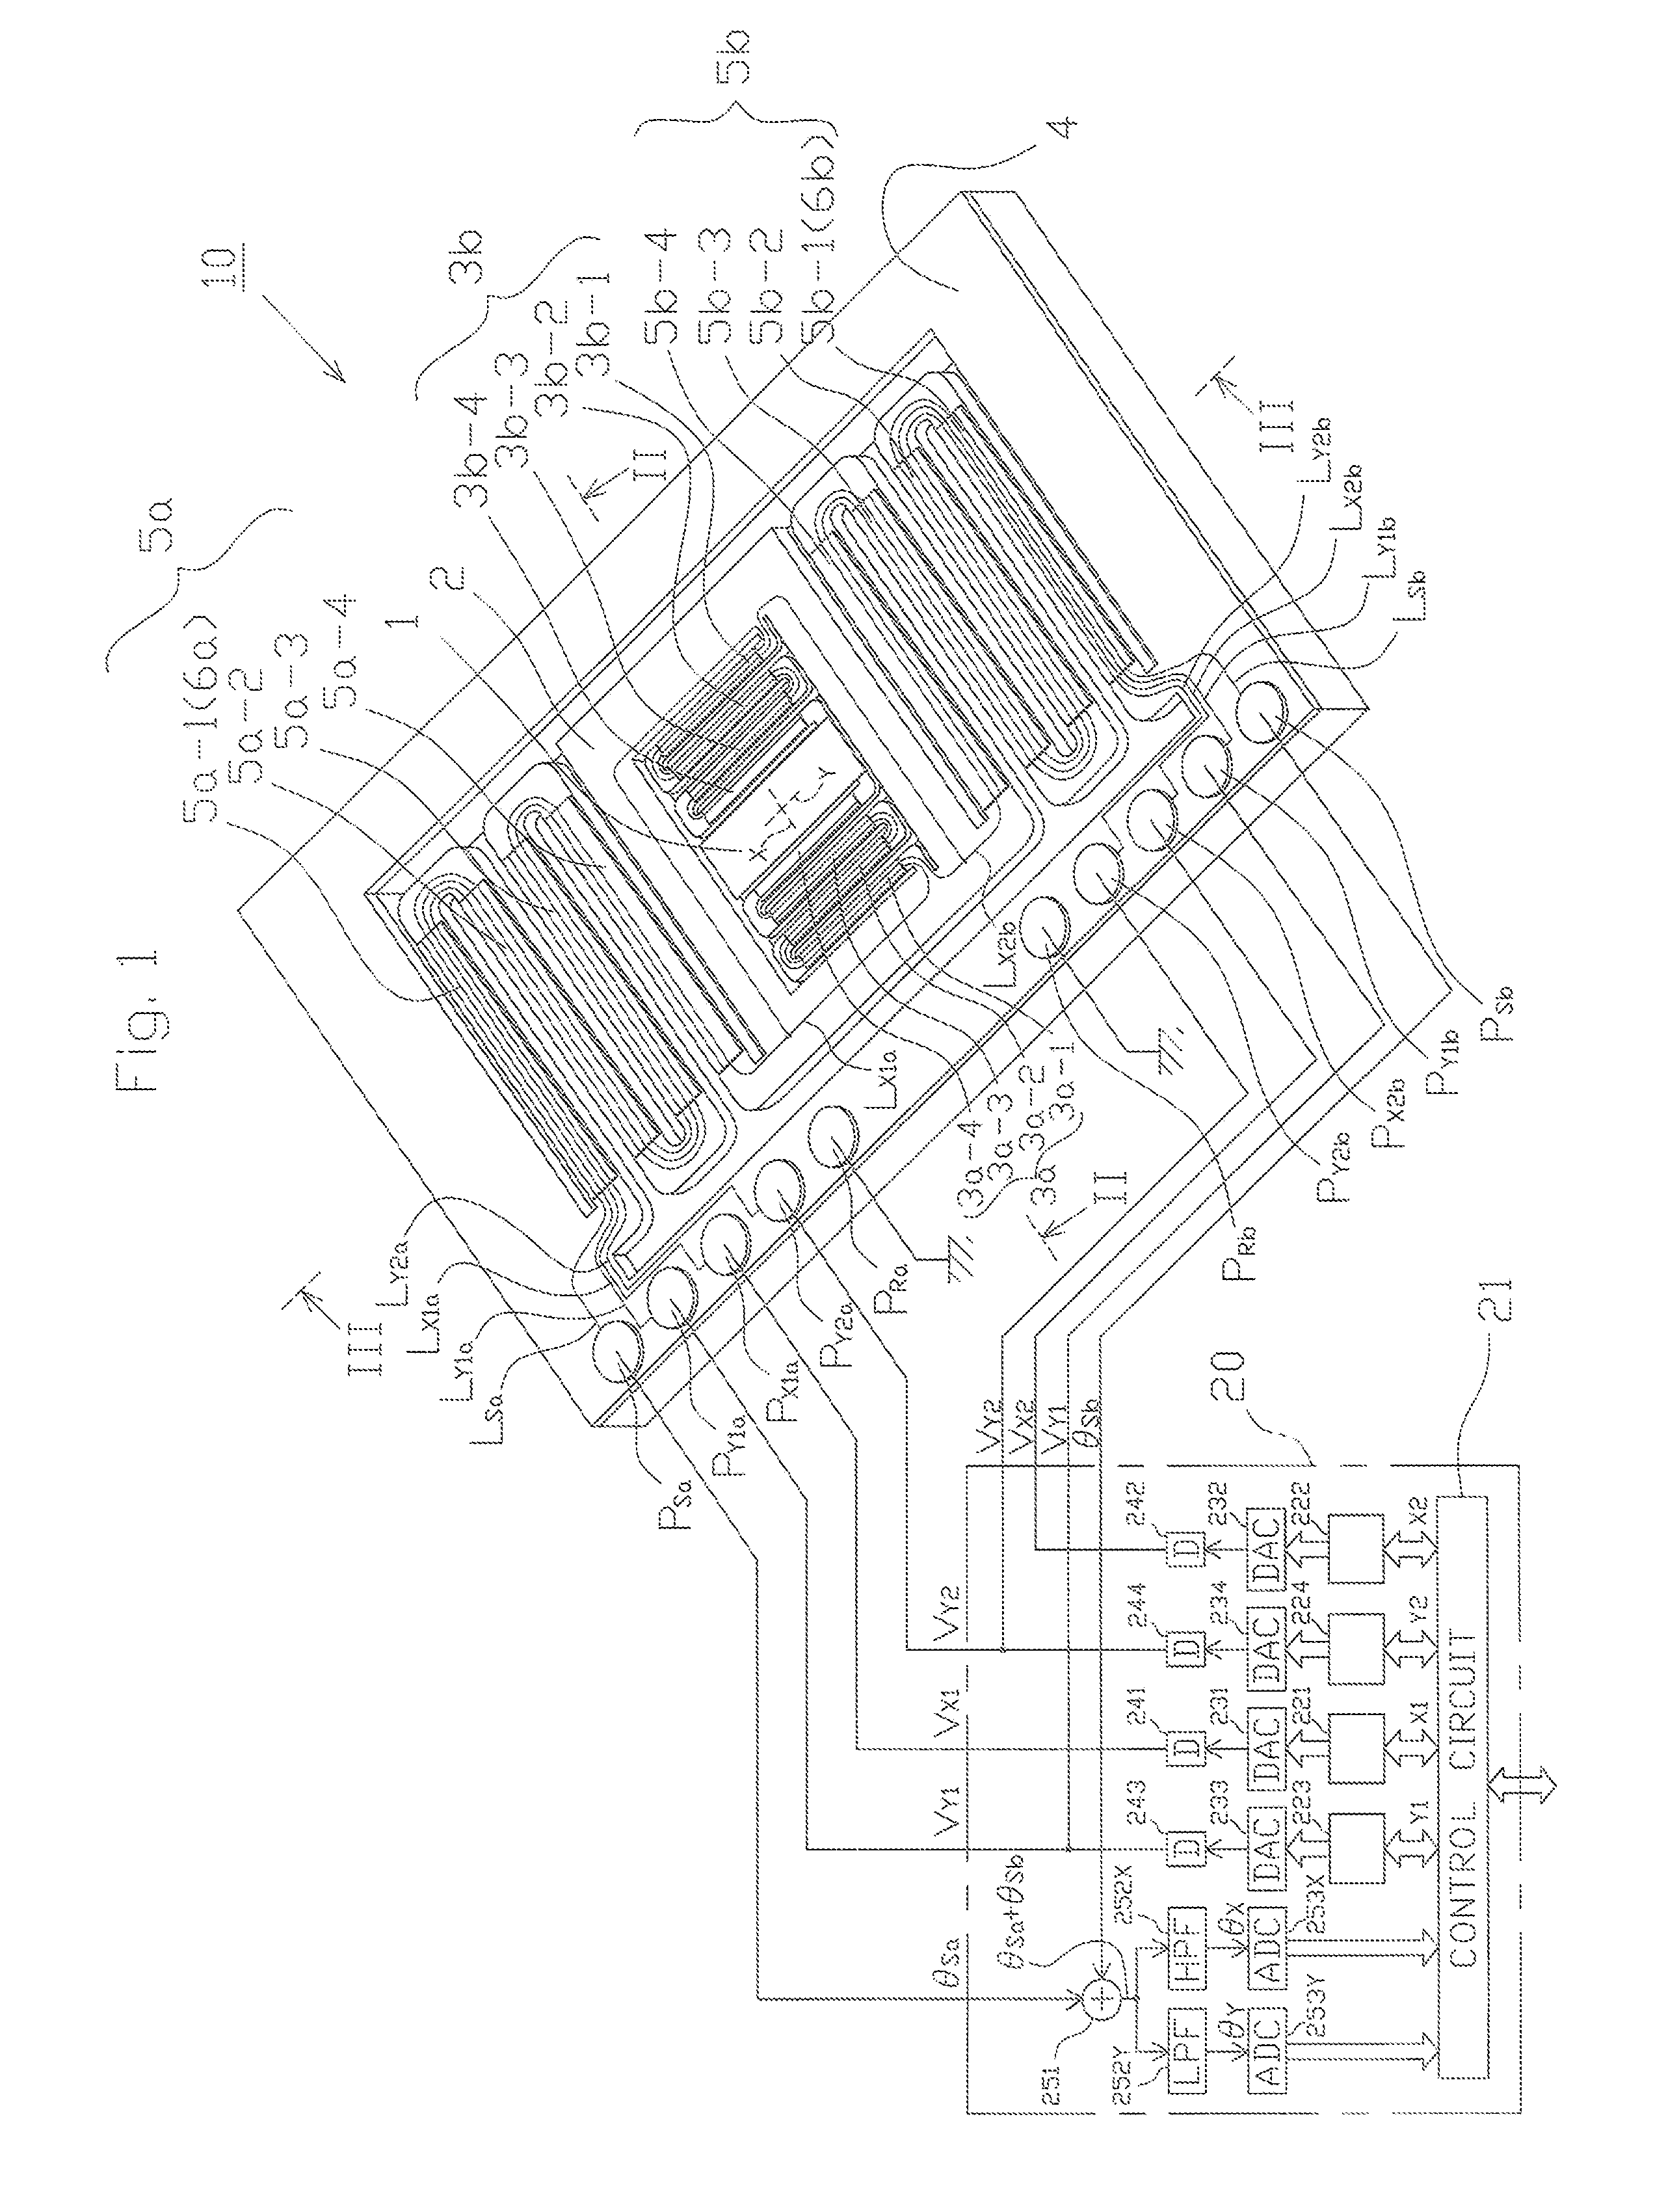 Optical deflector including piezoelectric sensor incorporated into outermost piezoelectric cantilever